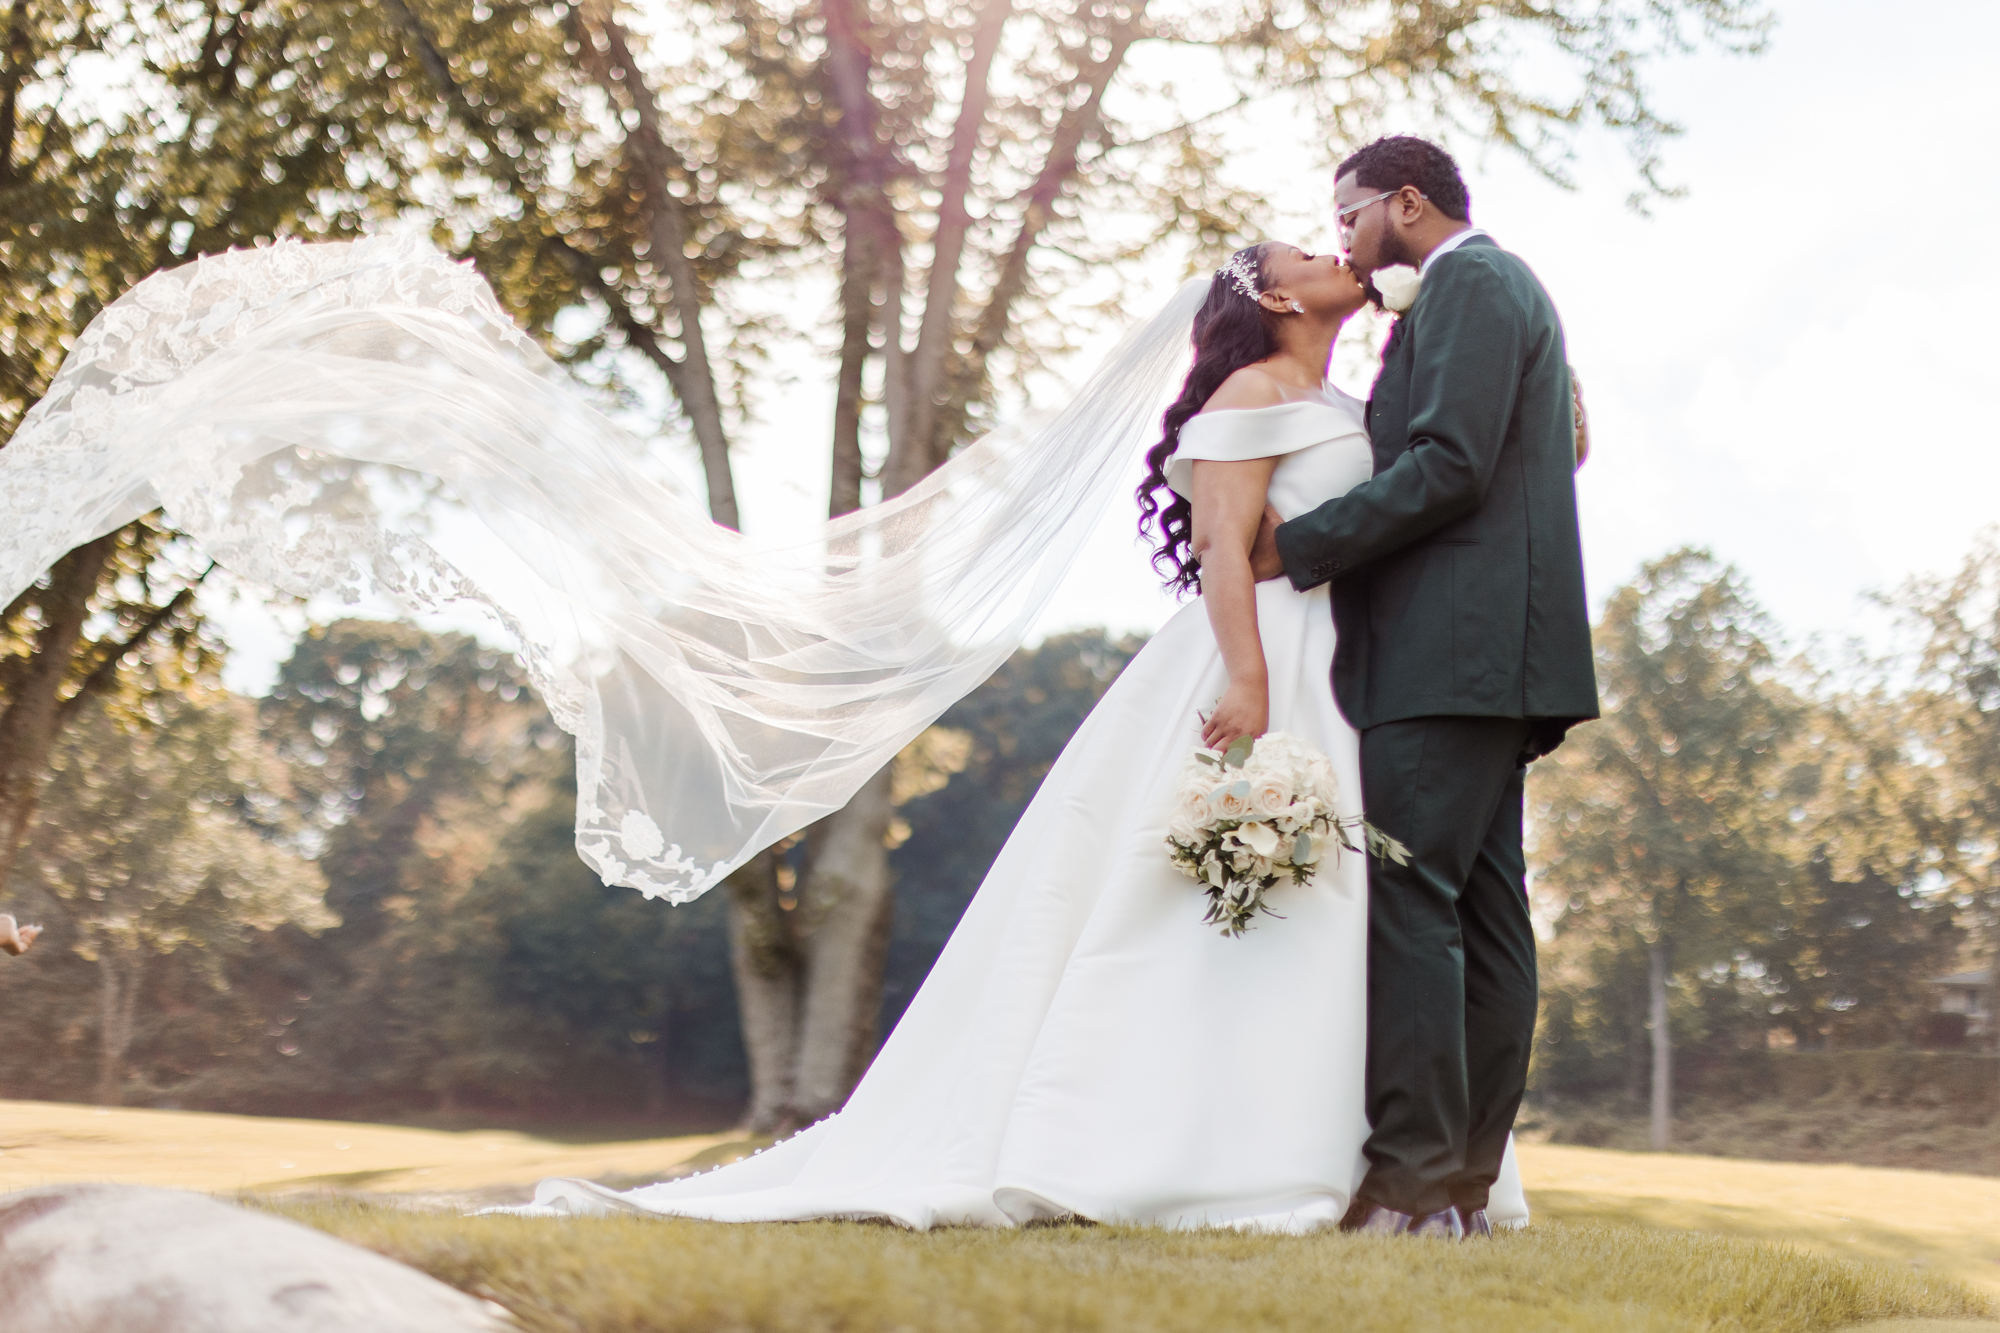 Cinematic New Jersey Wedding Photos at Edgewood Country Club in Fall